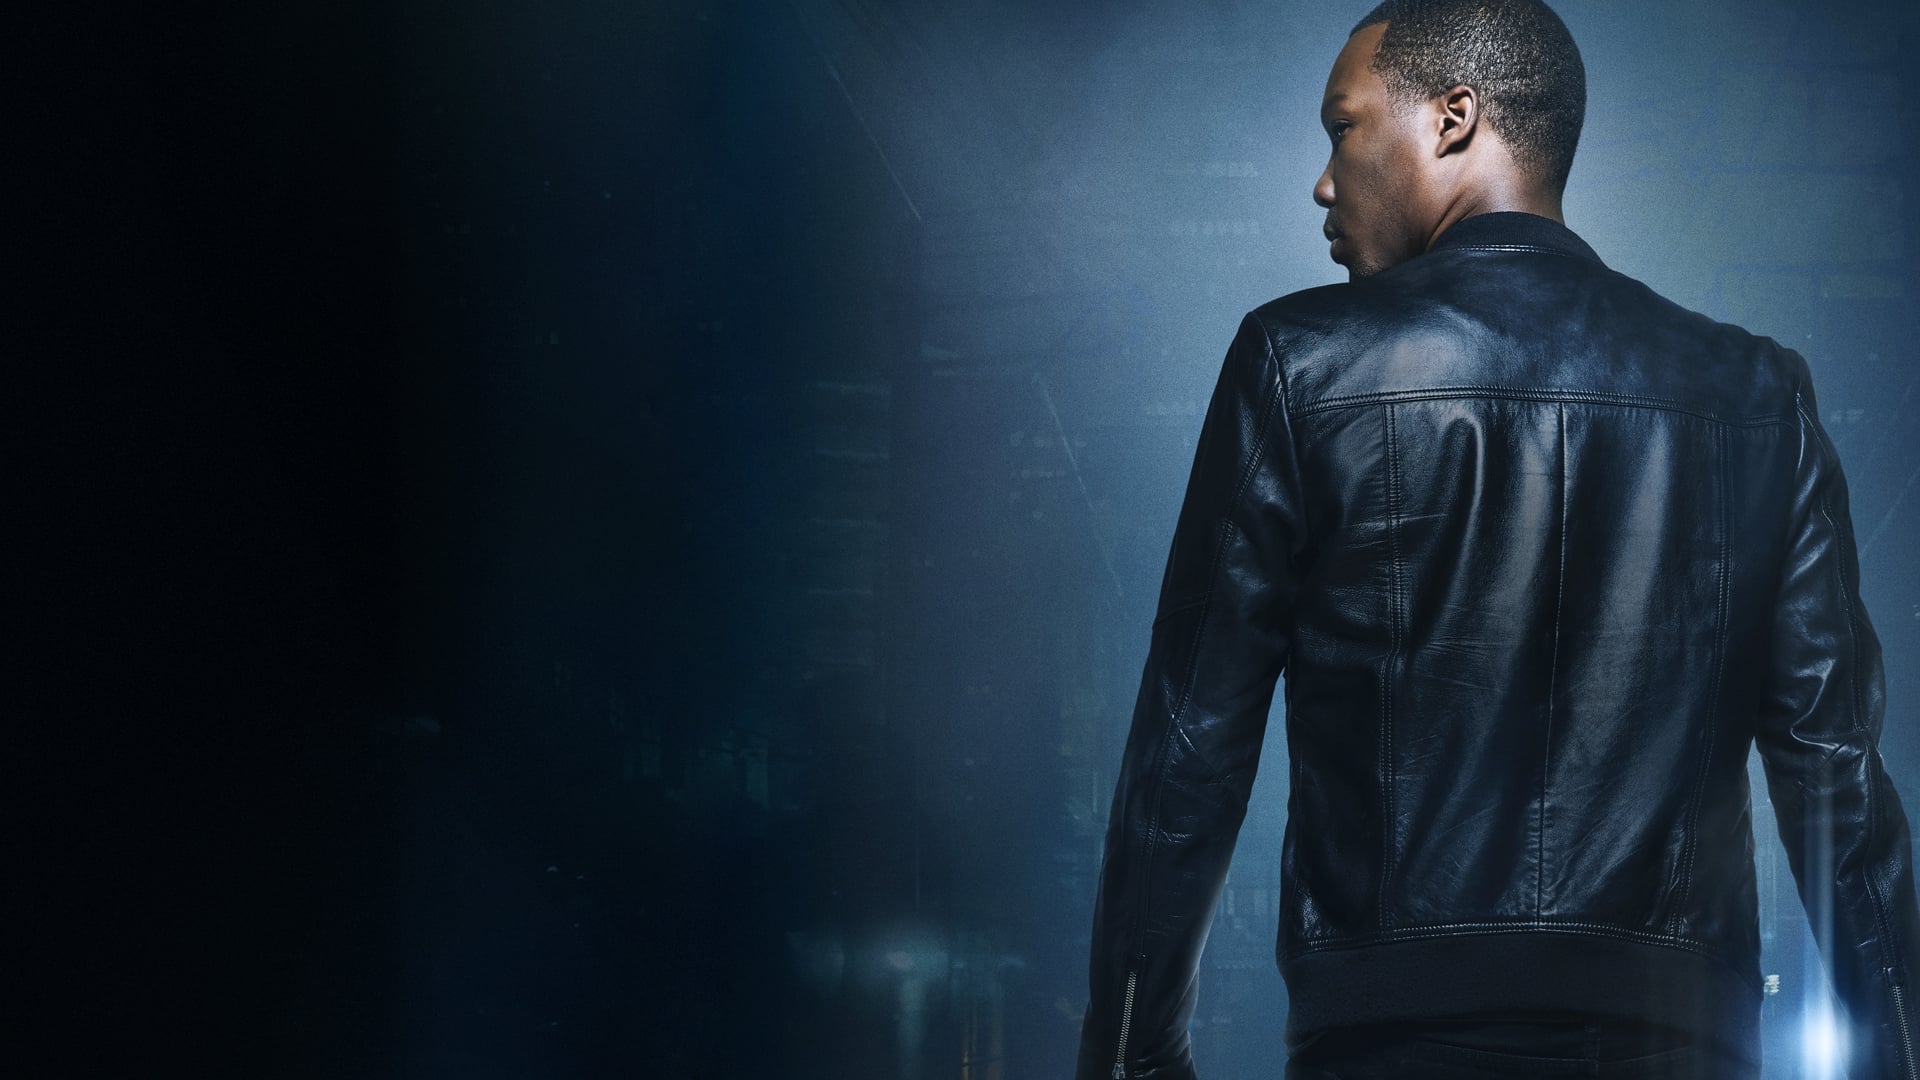 24 Legacy Wallpapers